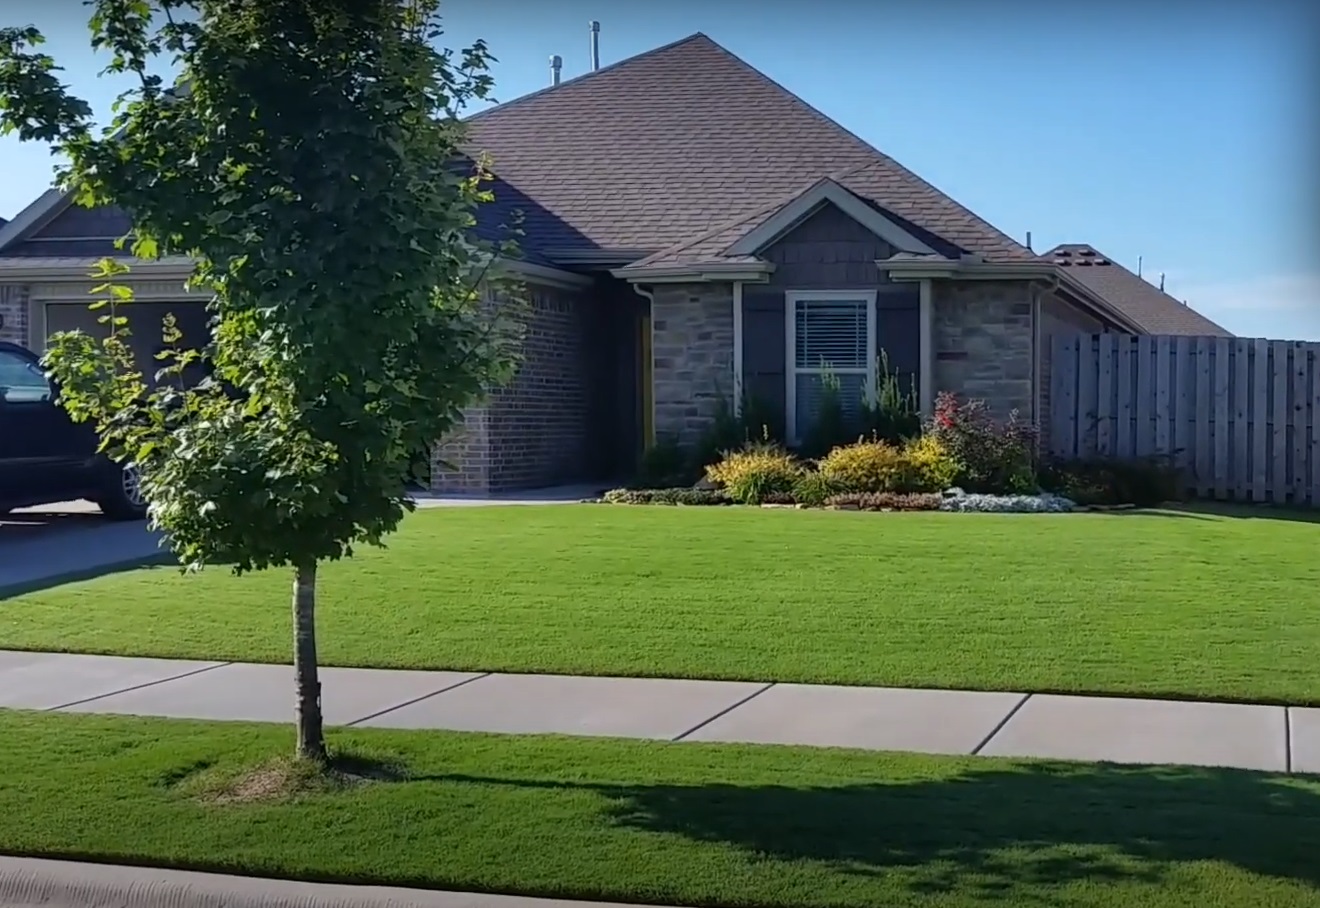 Basic lawn care and maintenance tips